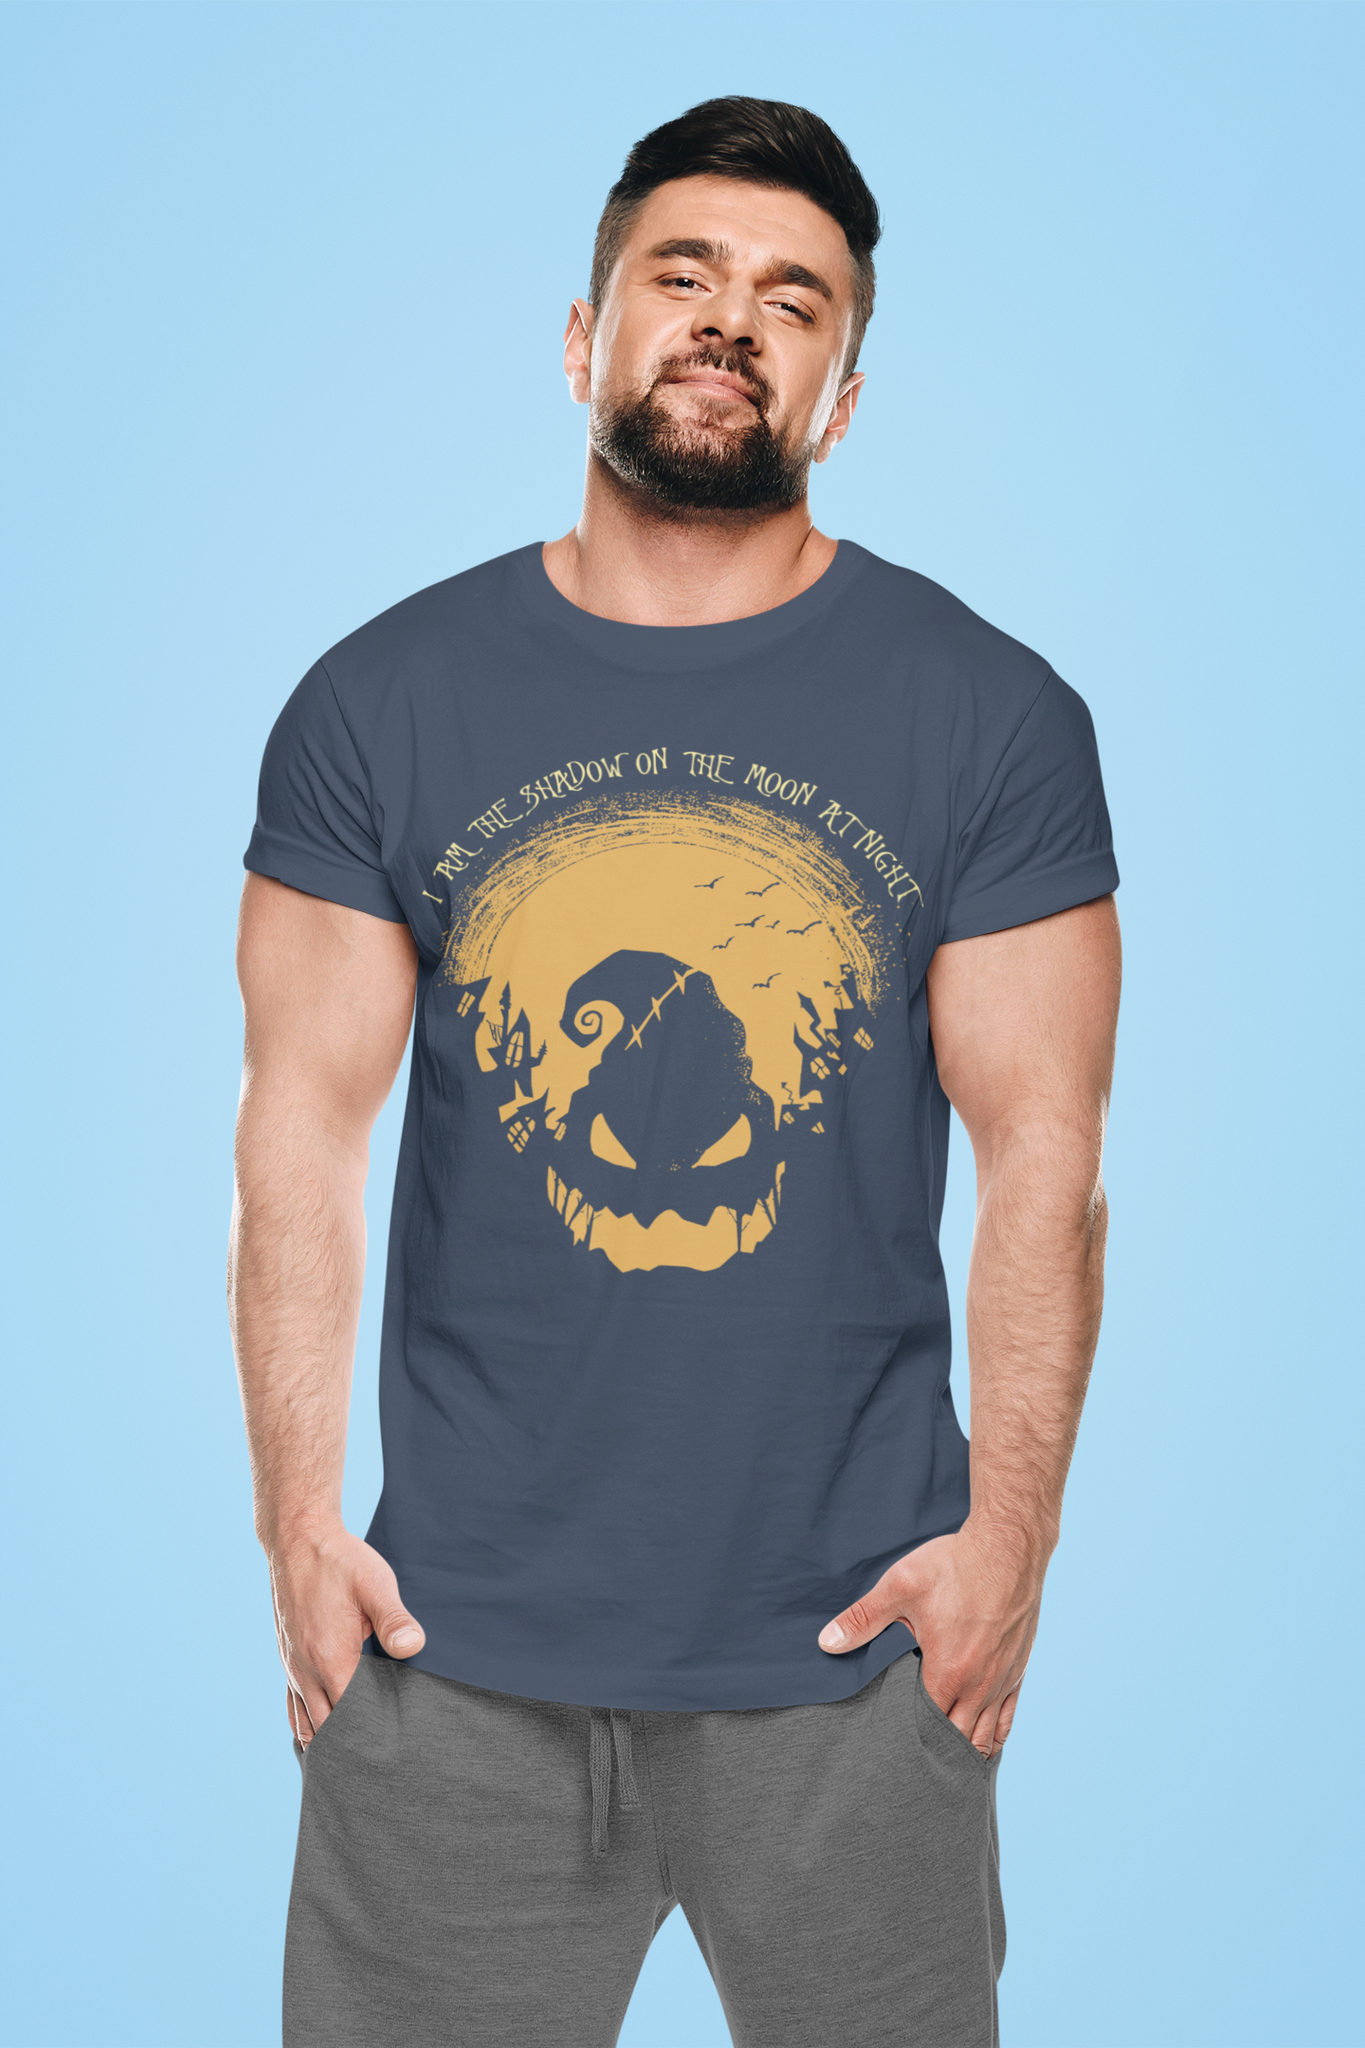 Nightmare Before Christmas T Shirt, I Am The Shadow On The Moon At Night Tshirt, Oogie Boogie T Shirt, Halloween Gifts